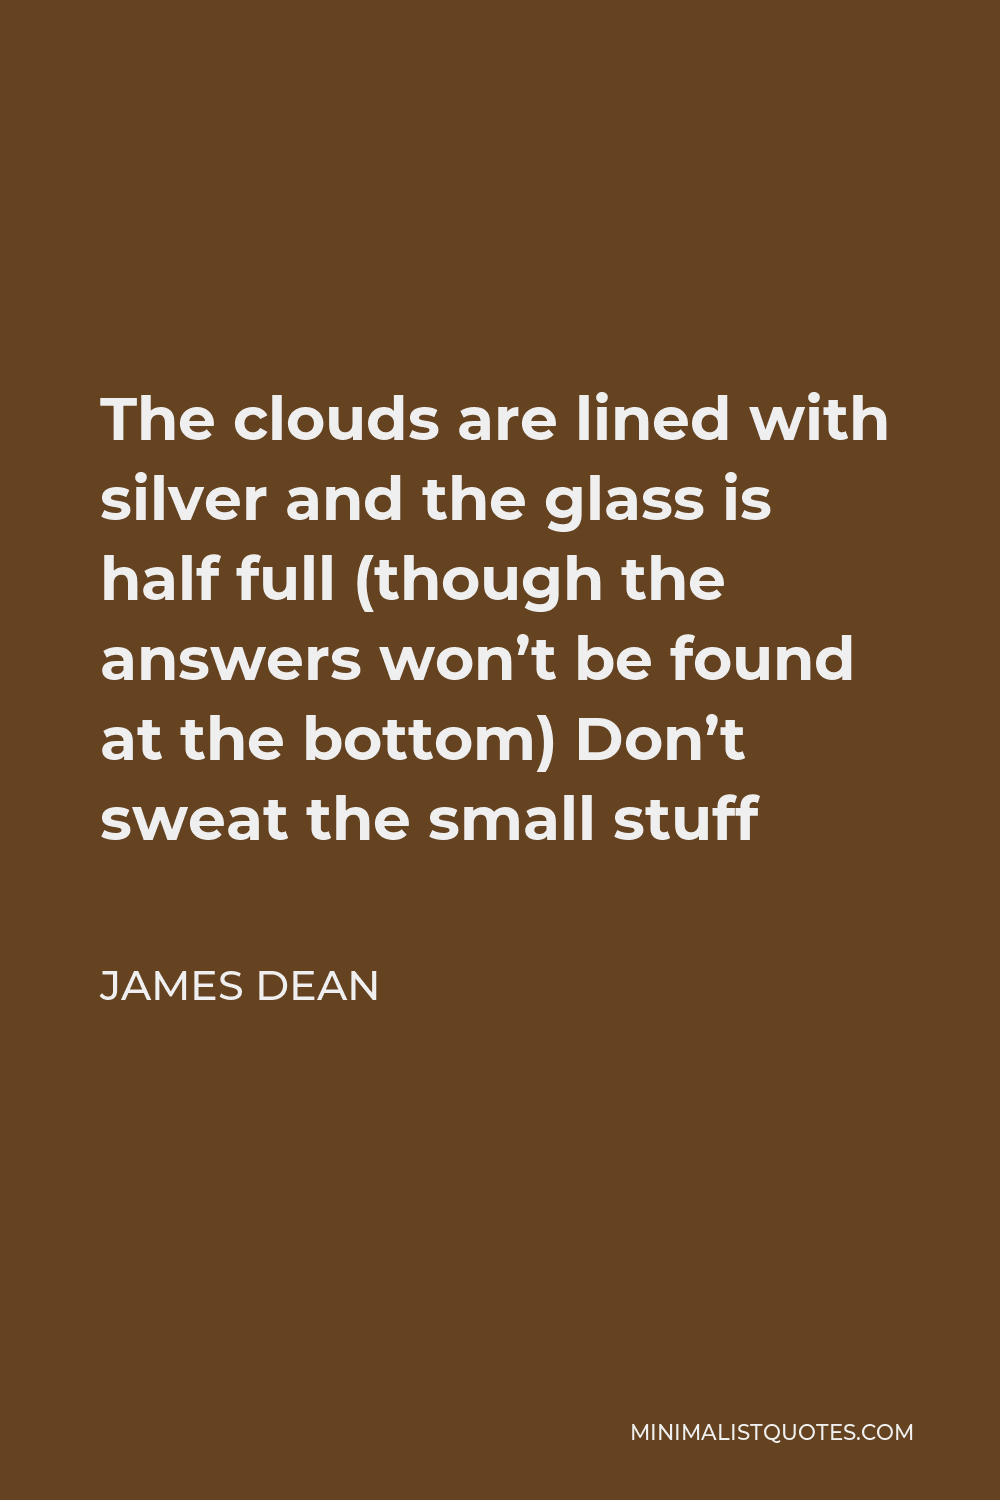 James Dean Quote - The clouds are lined with silver and the glass is half full (though the answers won’t be found at the bottom) Don’t sweat the small stuff